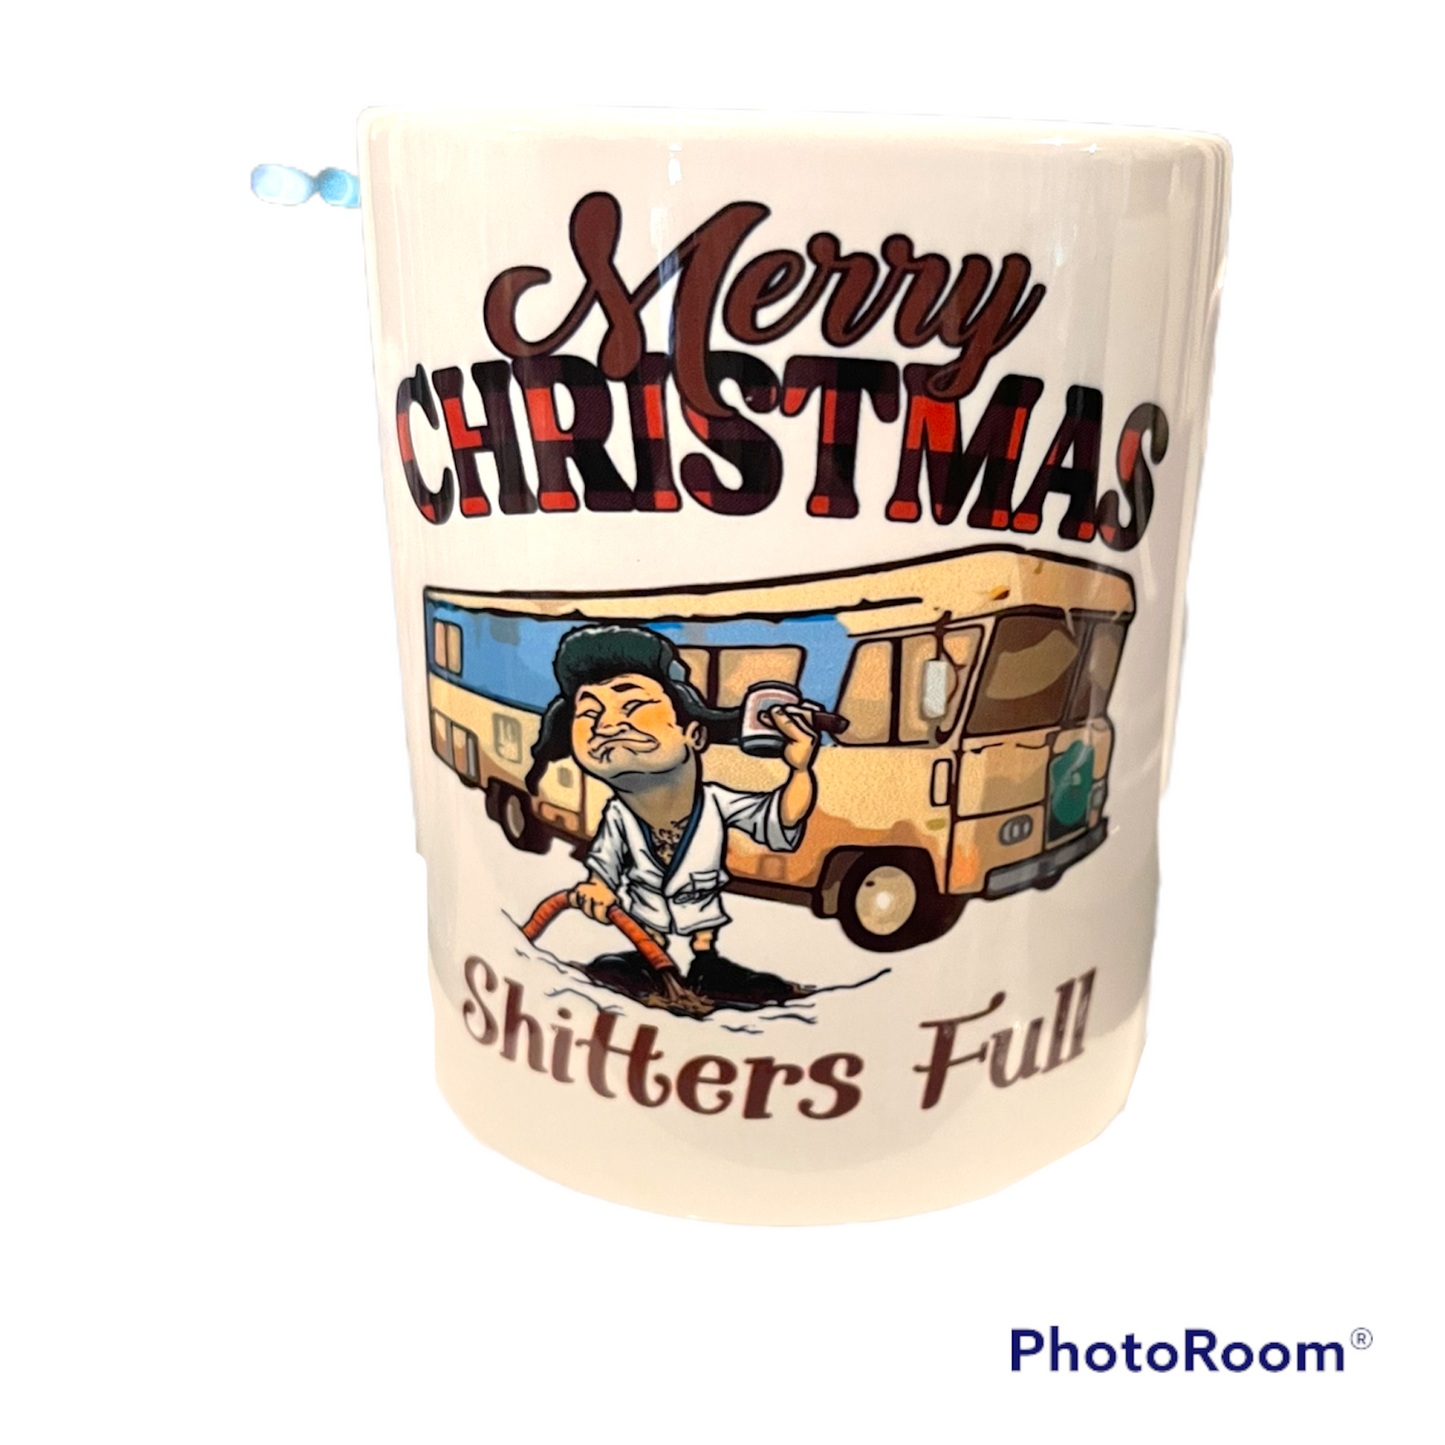 Merry Christmas Shitters Full Coffee Cup